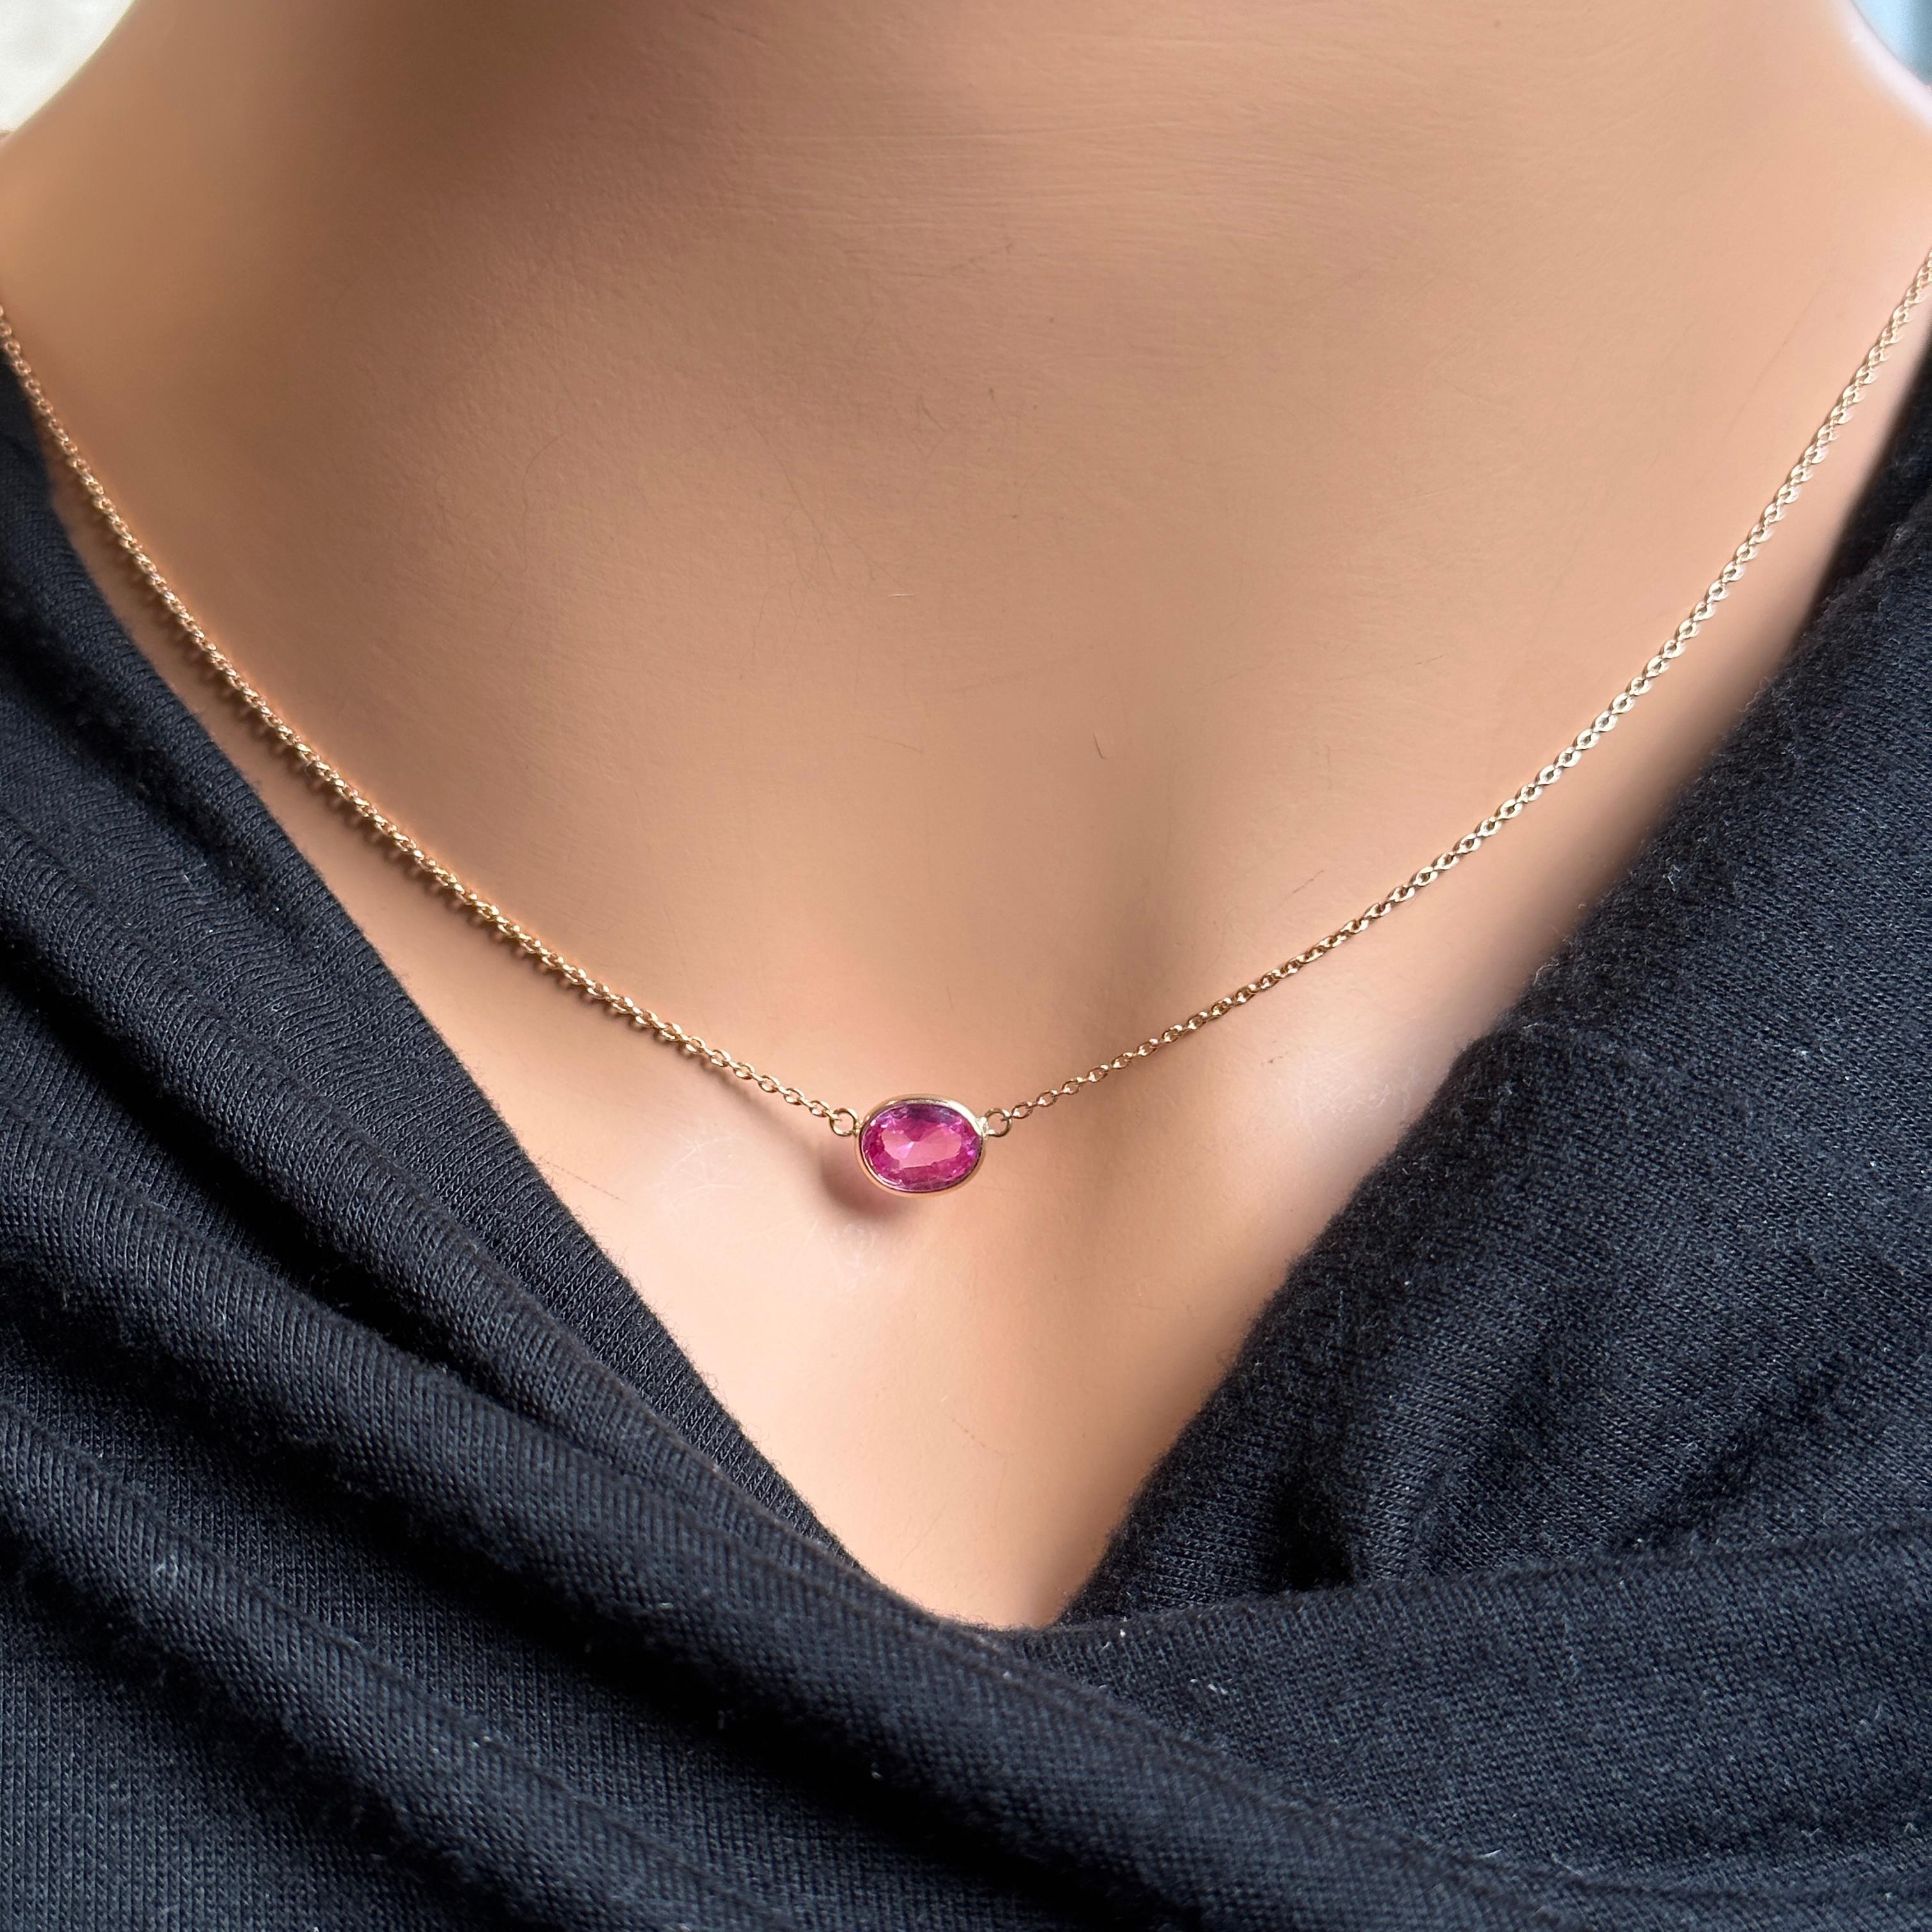 The 1.43 carat oval-cut pink sapphire would be the centerpiece of the necklace, showcasing its beautiful pink hue and natural clarity. The oval cut features a symmetrical and elongated shape that enhances the sapphire's sparkle and creates a classic